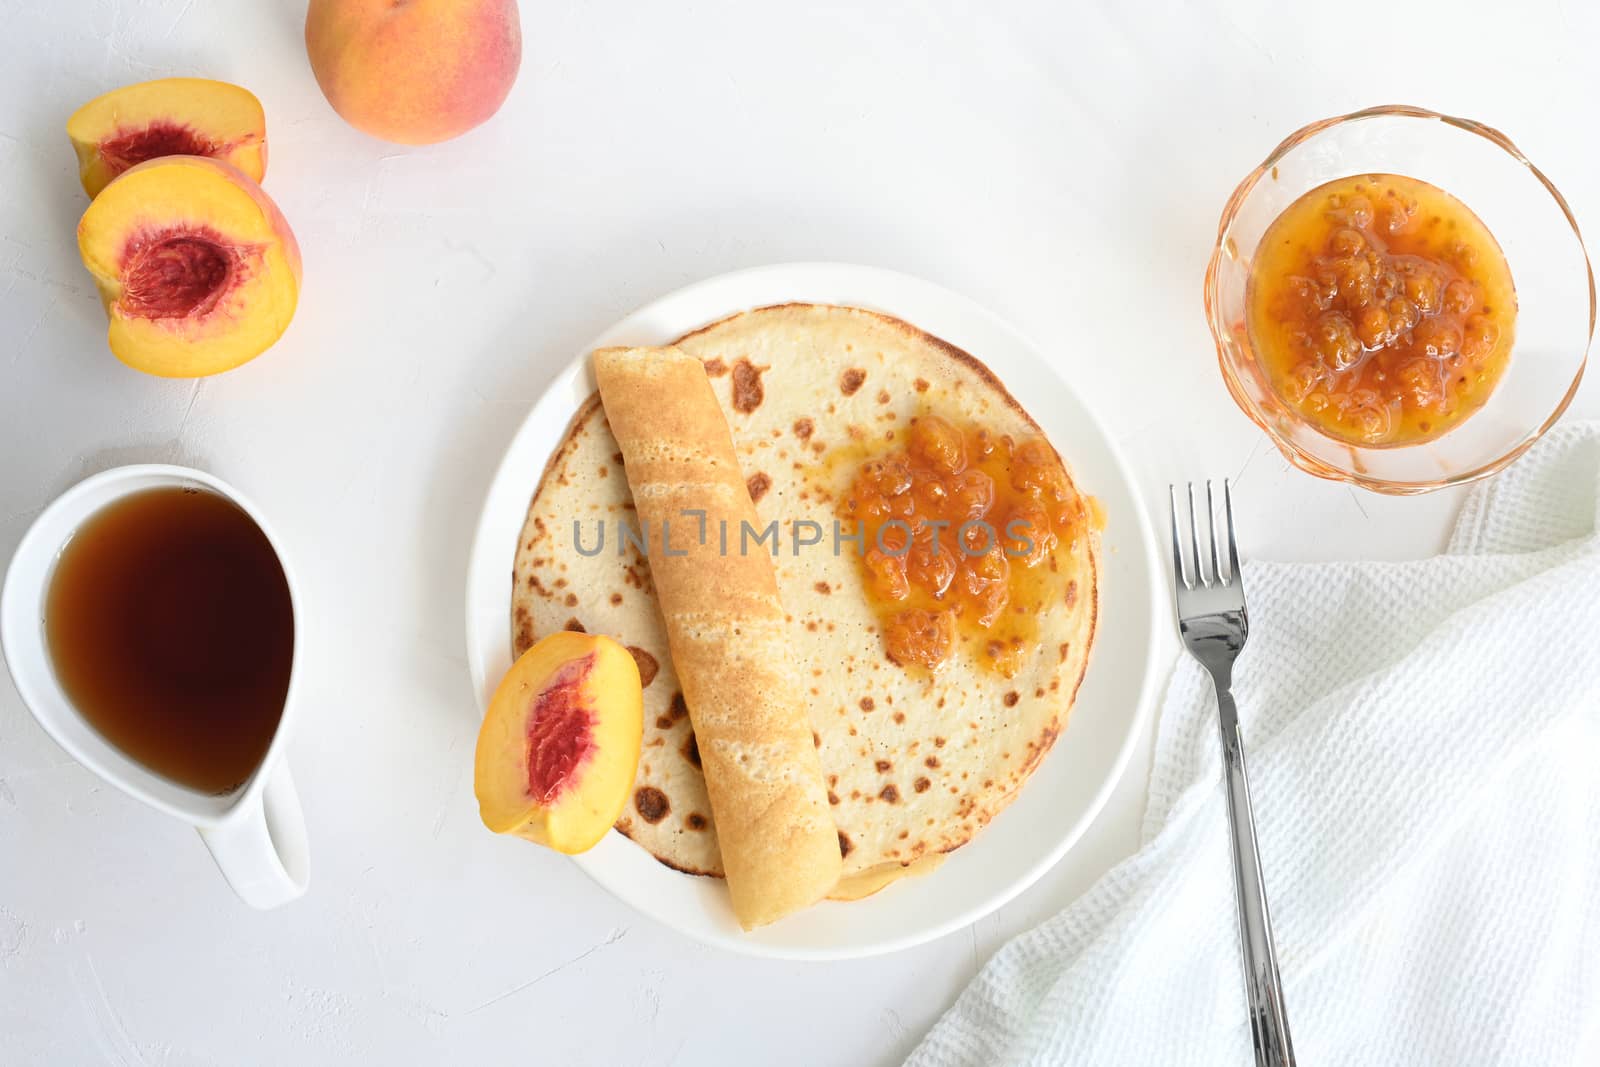 large pancakes with jam, tea and peaches on white background by sashokddt